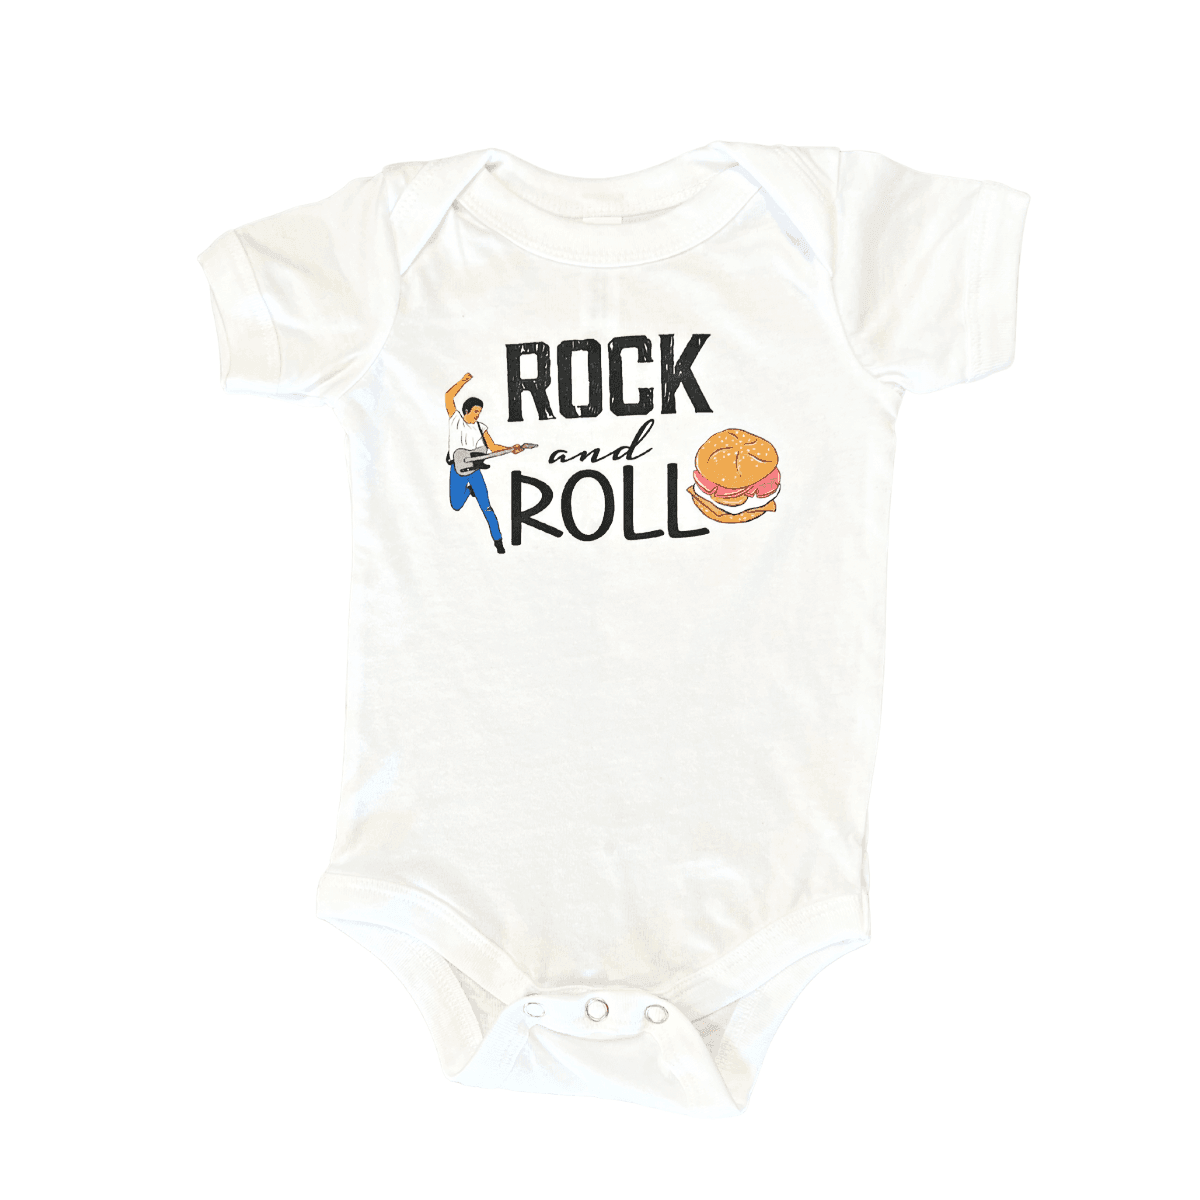 A white baby onesie with a New Jersey theme showing "Rock and Roll" with a guitar rocking musician on the left and a pork roll on the right